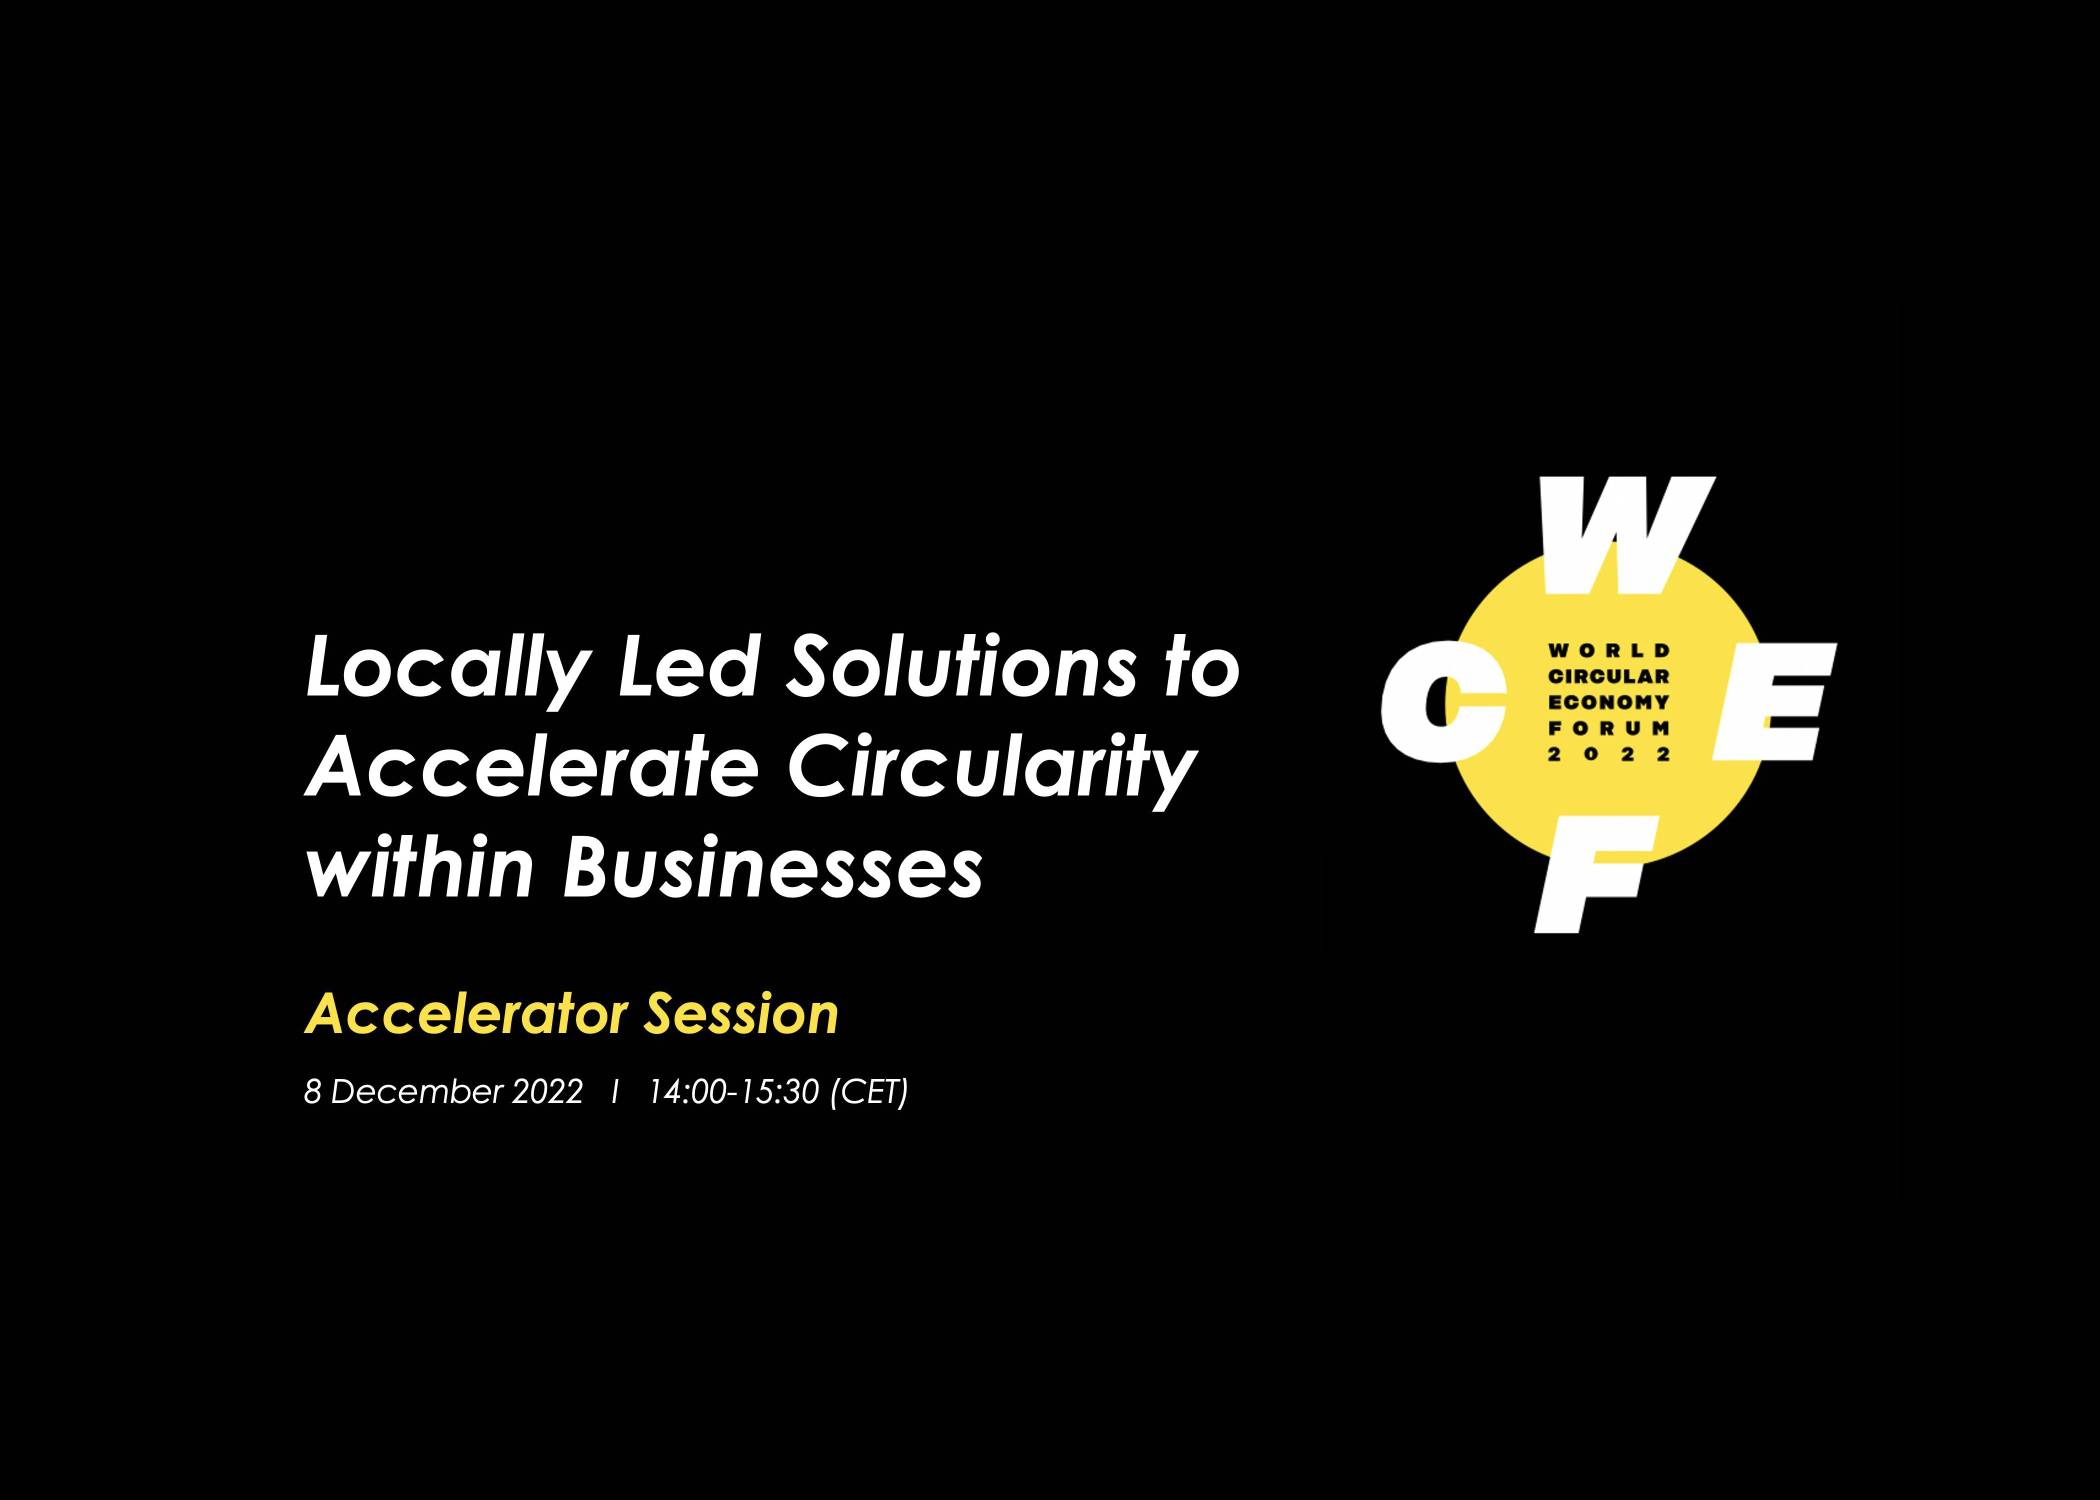 Locally Led Solutions to Accelerate Circularity within Businesses